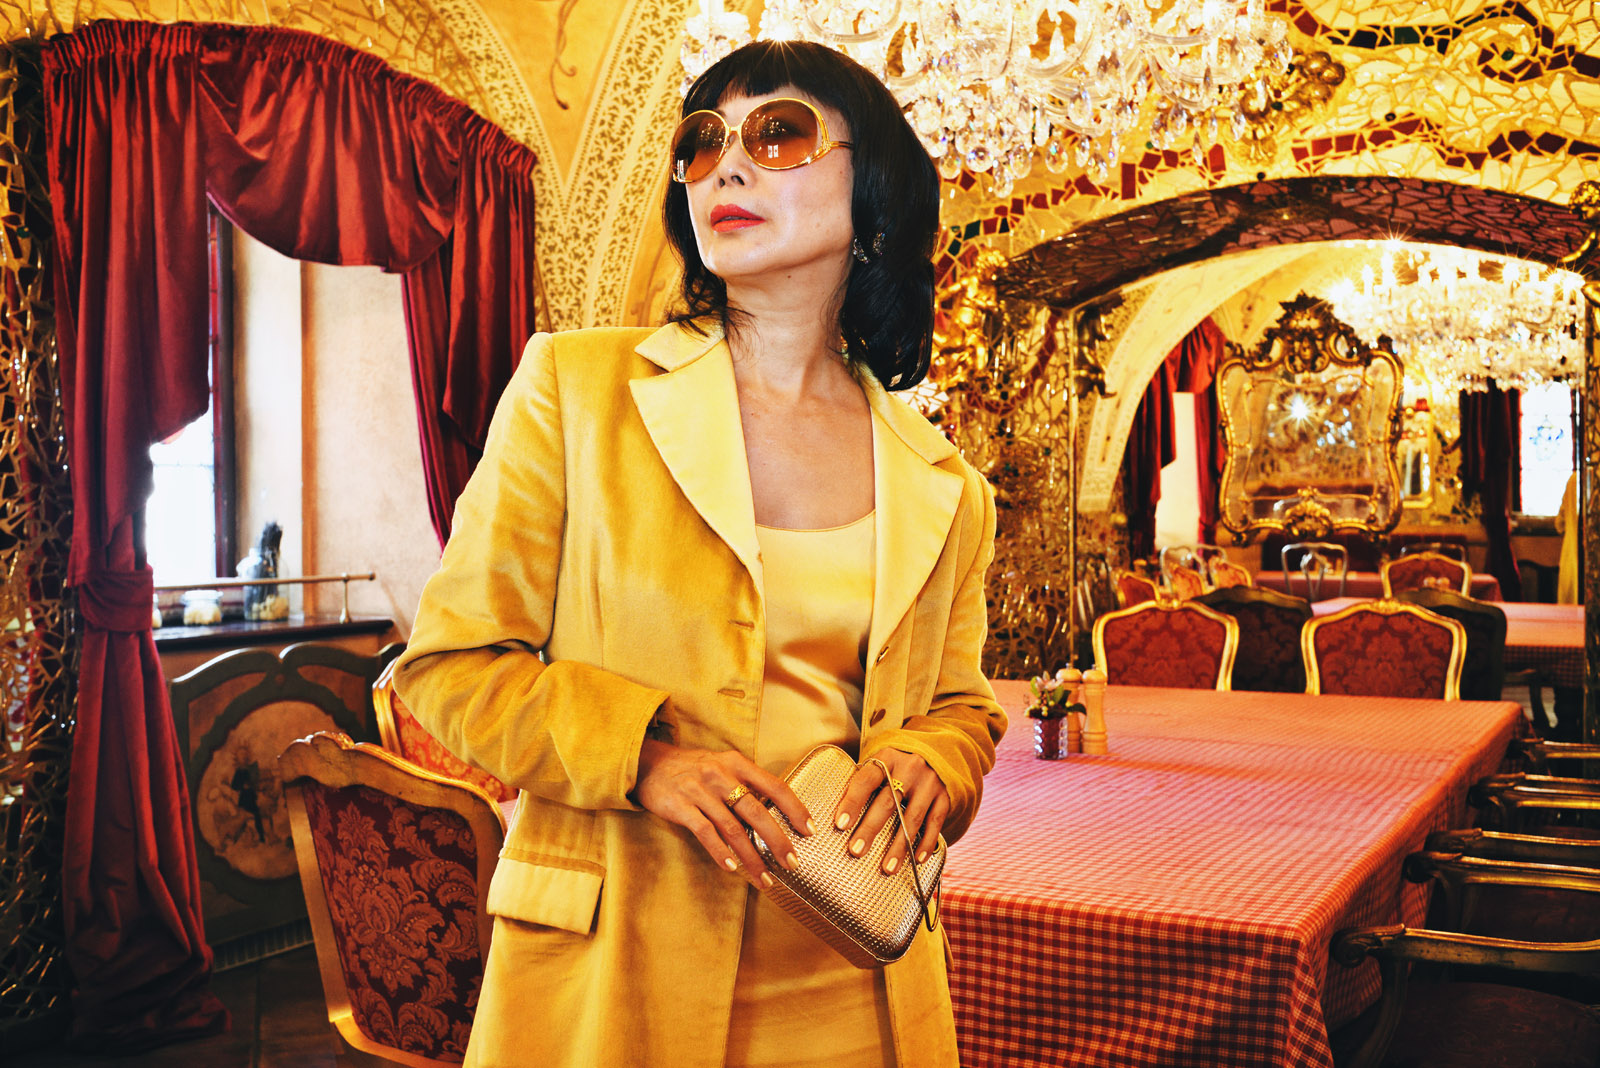 Mirrored restaurant in Prague, Vivienne with gold clutch, fashion photography by Kent Johnson